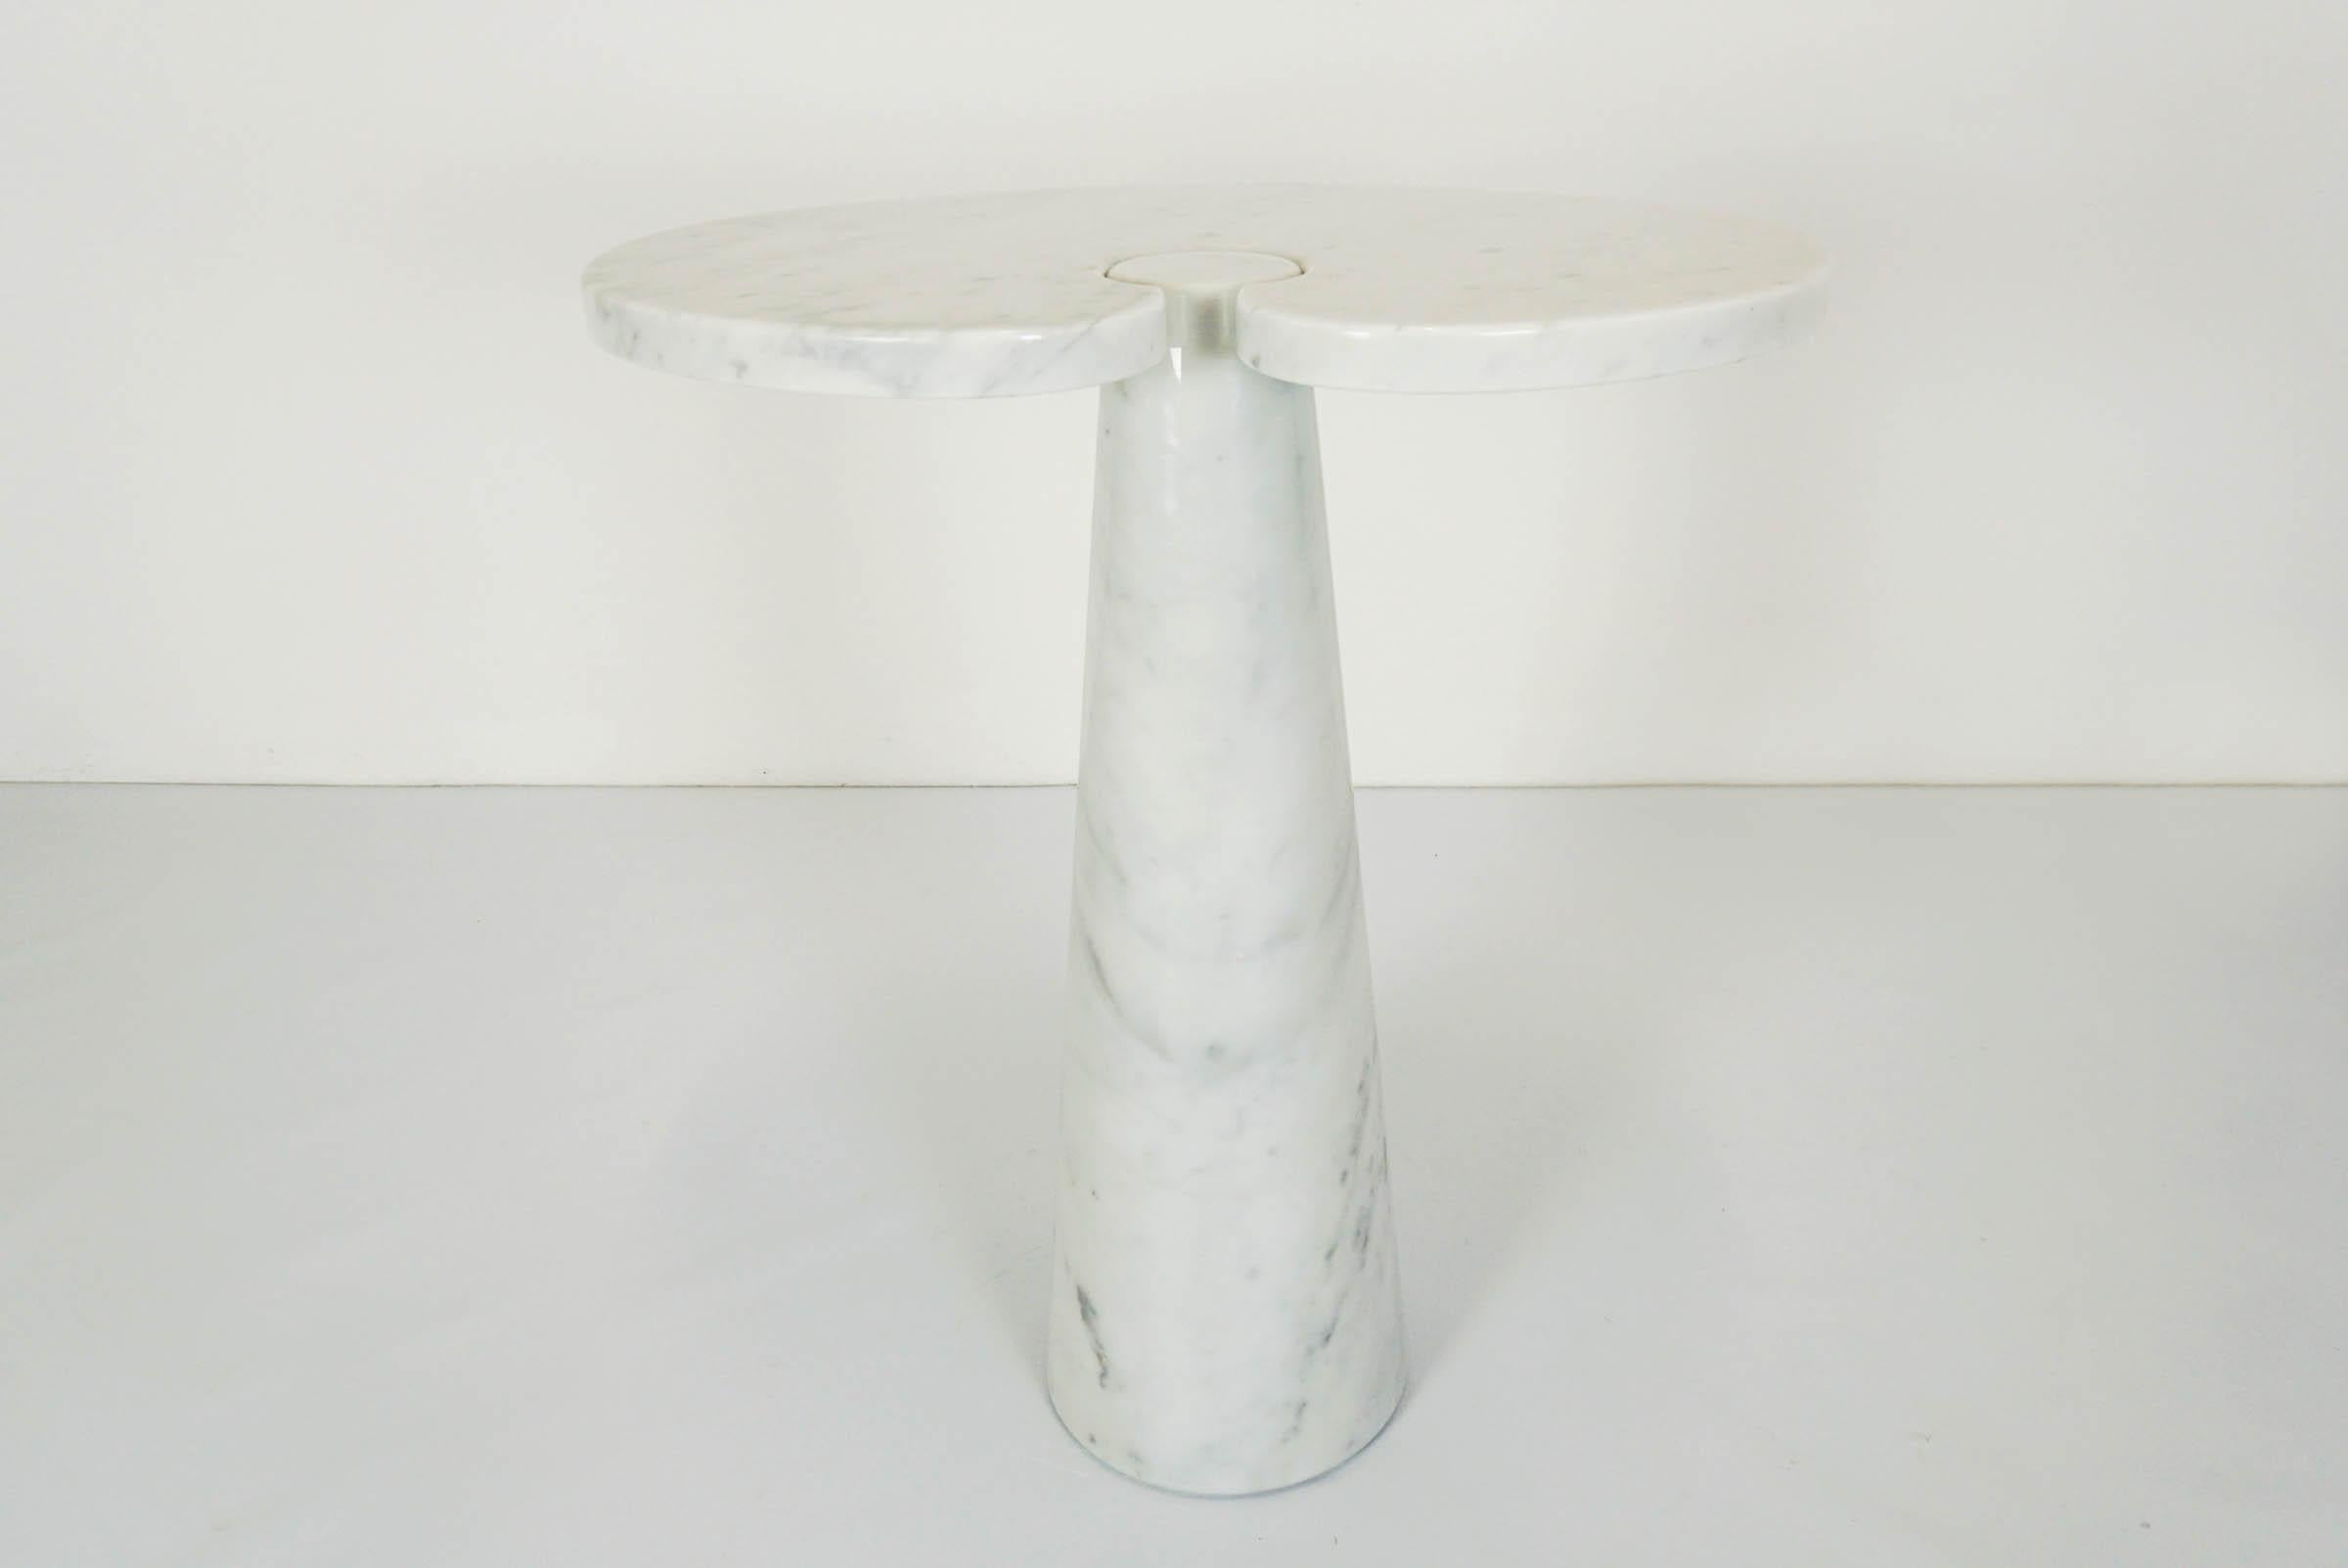 Very nice Gueridon side table in Carrara marble
Possibilit of a second one in lower size.